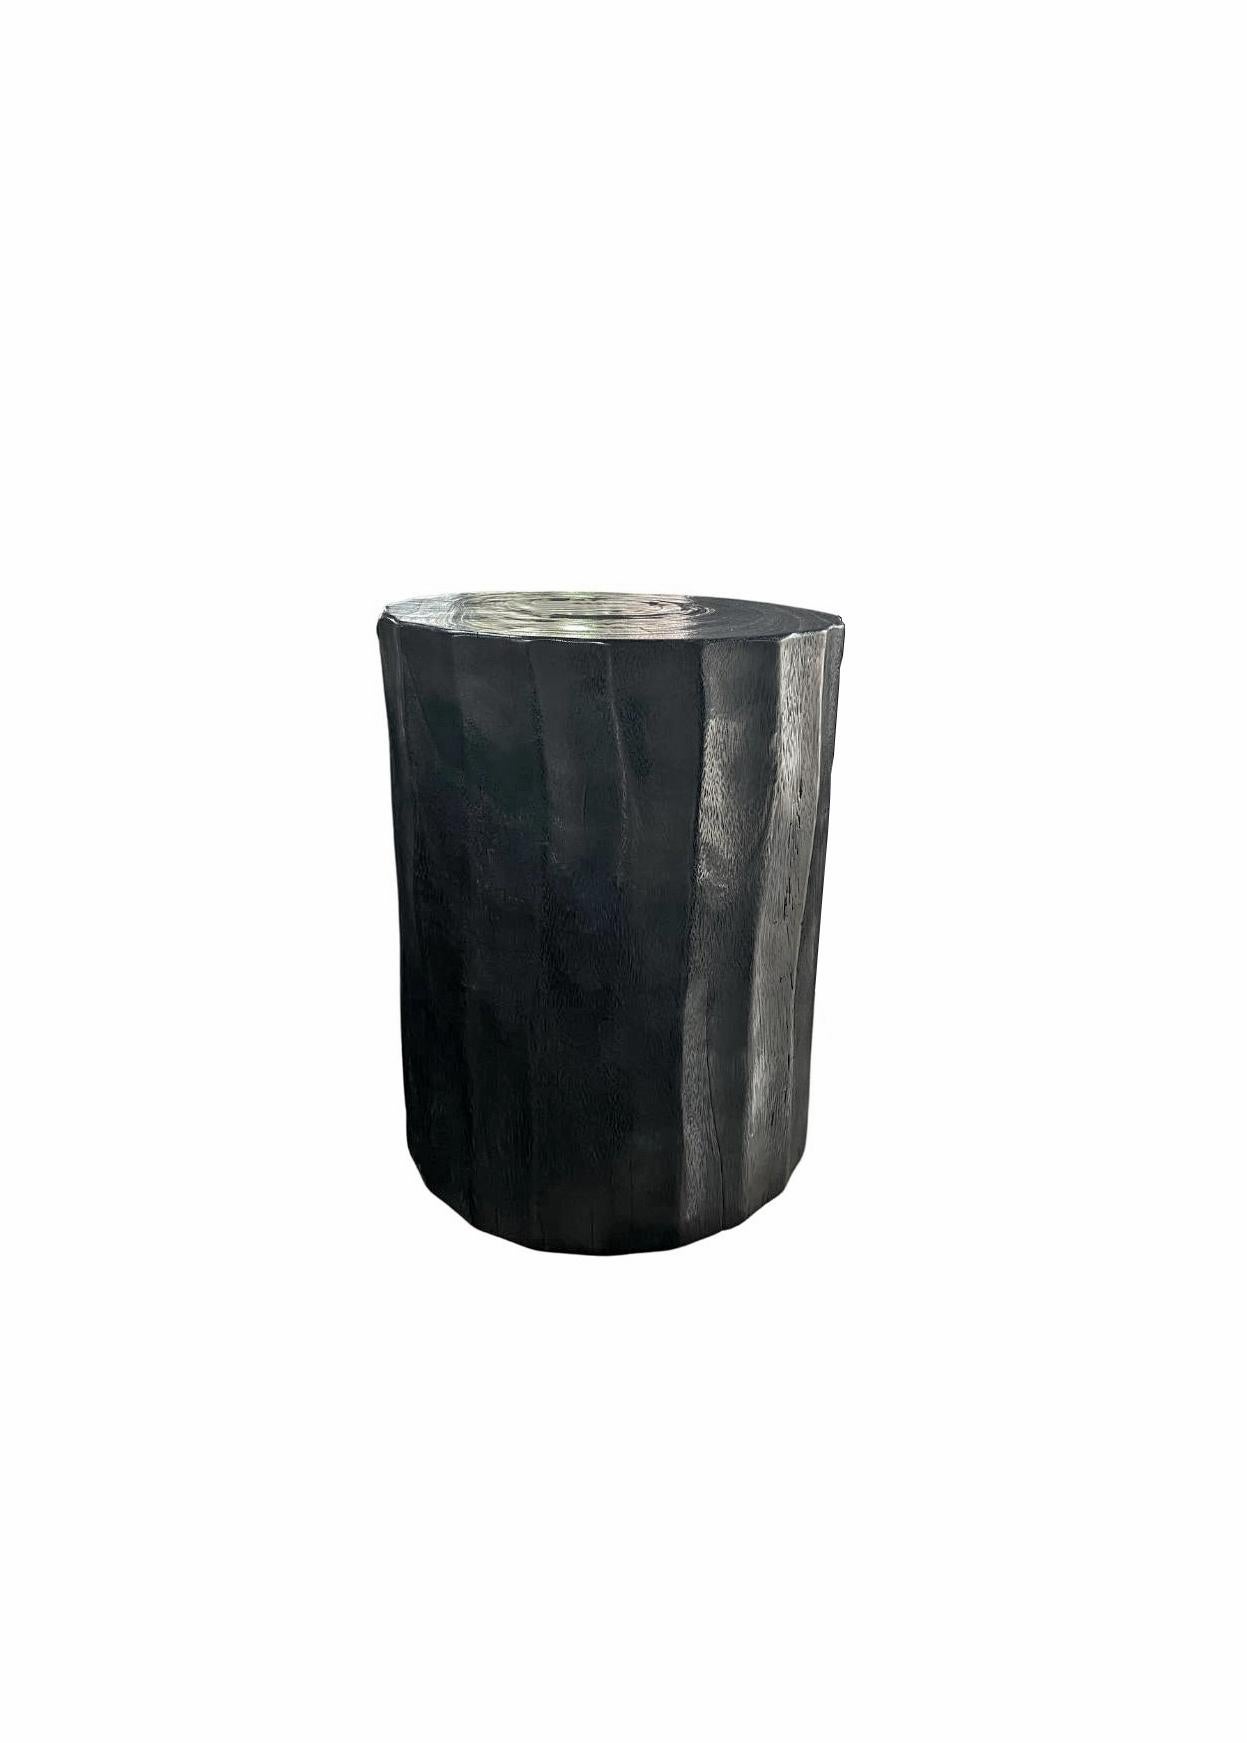 A wonderfully sculptural side table. Its rich black pigment was achieved through burning the wood three times. Its neutral pigment and subtle wood texture makes it perfect for any space. A uniquely sculptural and versatile piece certain to invoke